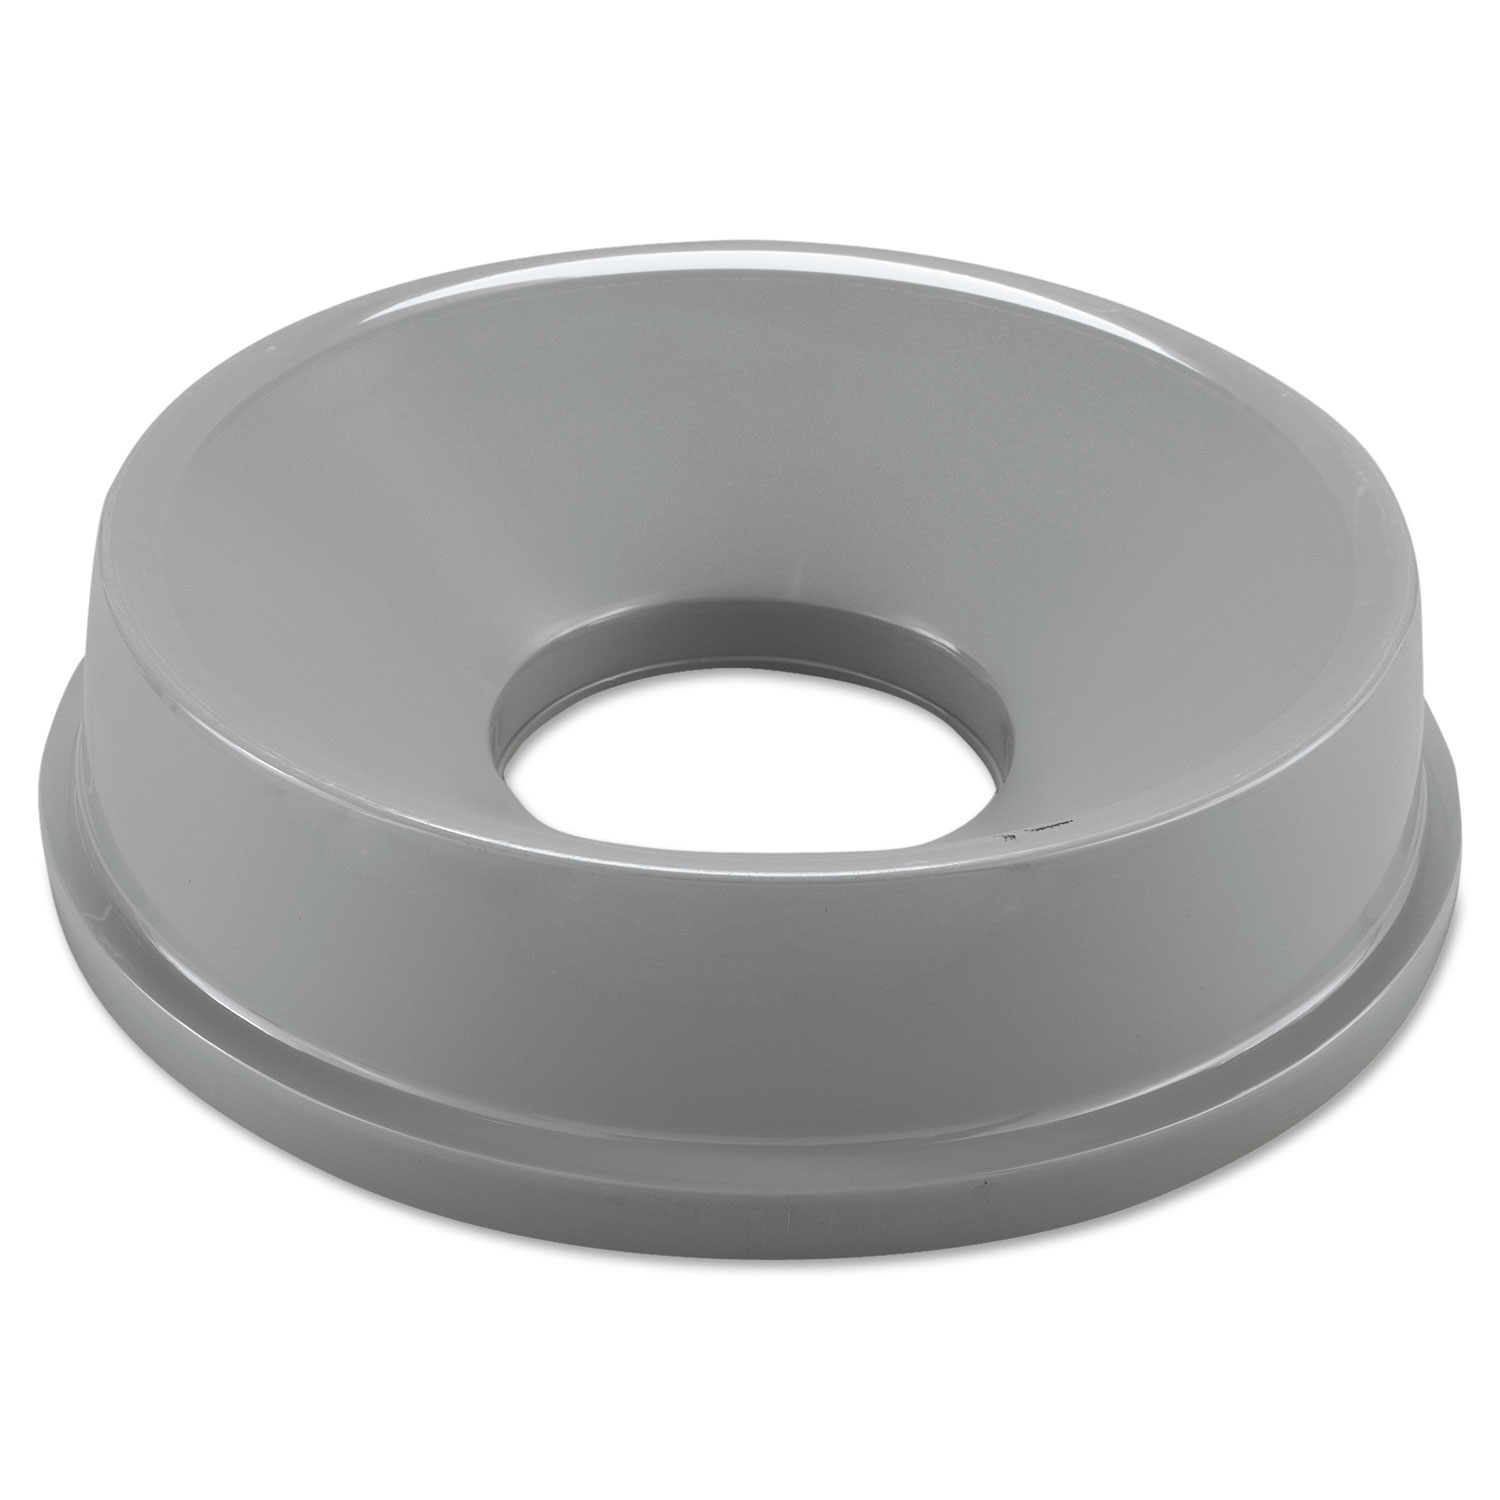  Rubbermaid Commercial FG354800GRAY Untouchable Funnel Top, Round, 16.25 diameter, Gray (RCP3548GRA) 